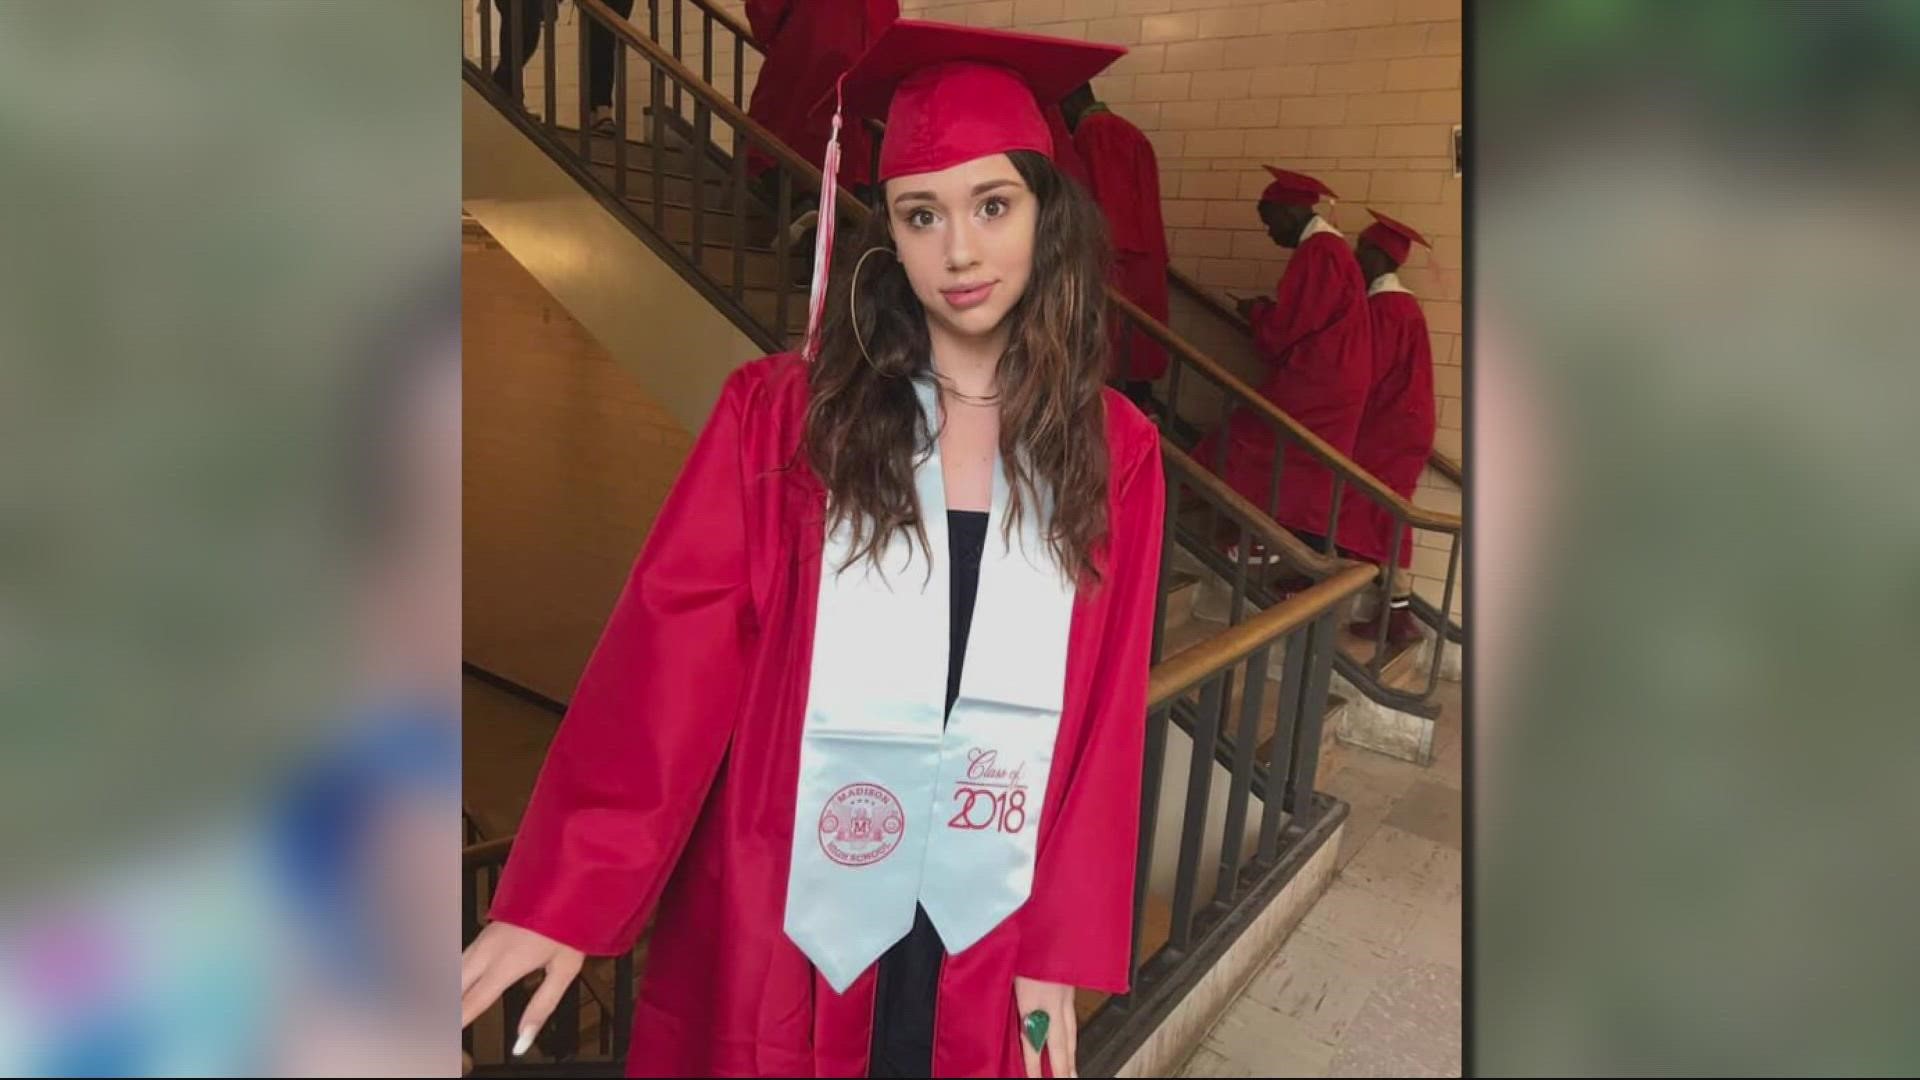 Logan Nettleton was 19 years old when she was killed on Aug. 30, 2019.